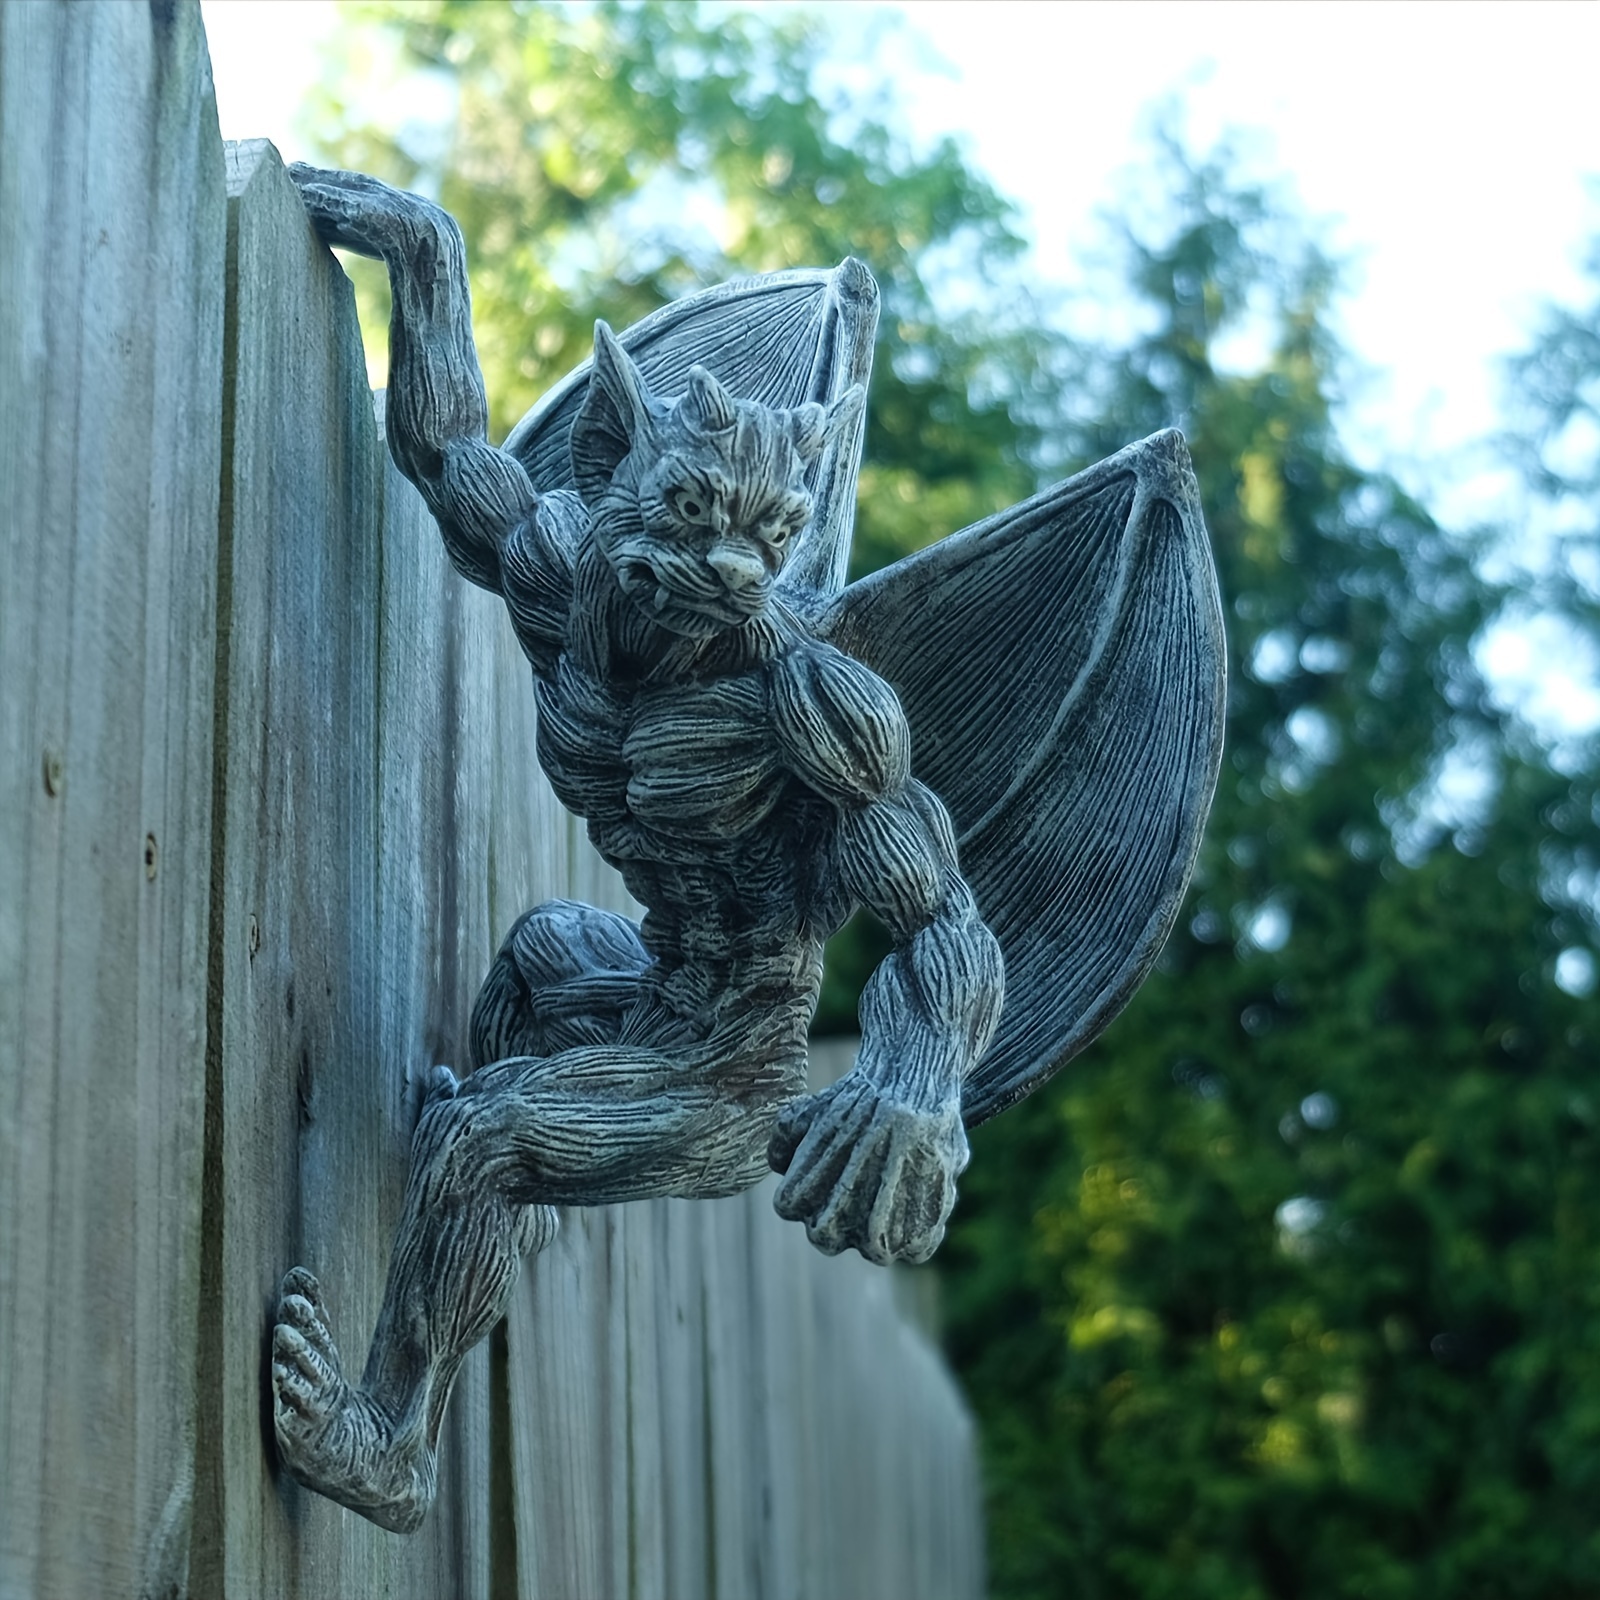 

1pc, Gothic Winged Gargoyle Resin Statue, Vintage Style Outdoor Fence Hanger, 10x13.5cm (3.93x5.11in) Decorative Wall Mount Sculpture For Garden, Patio, Home Decor